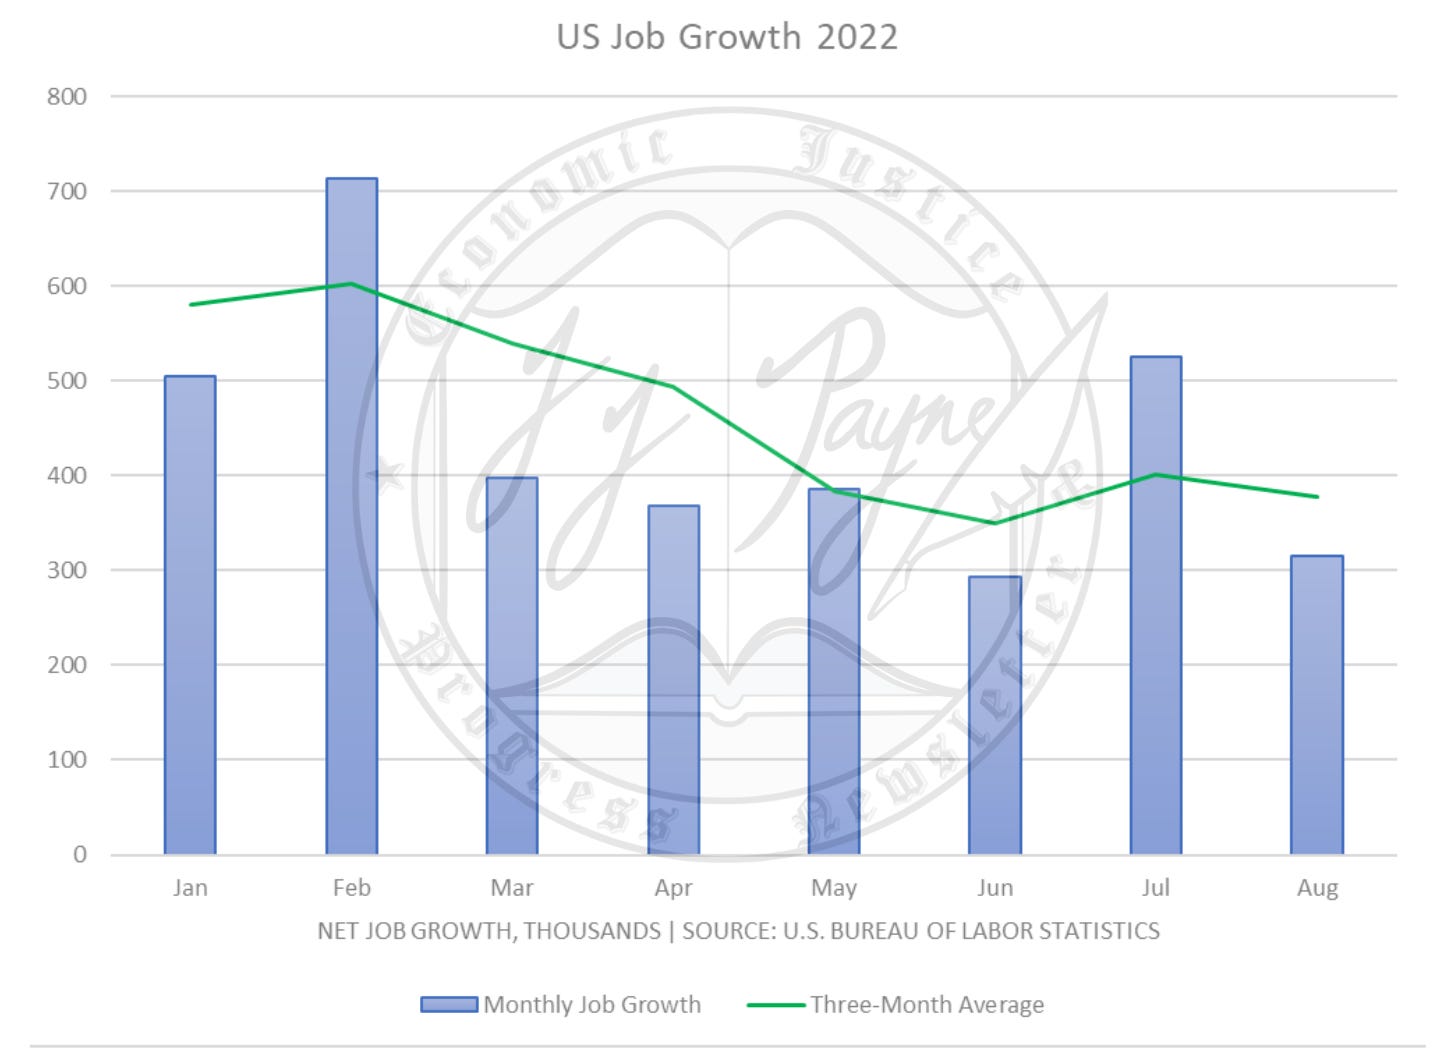 Total vs. Average Job Gains per BLS August 2022 Employment Situation Summary